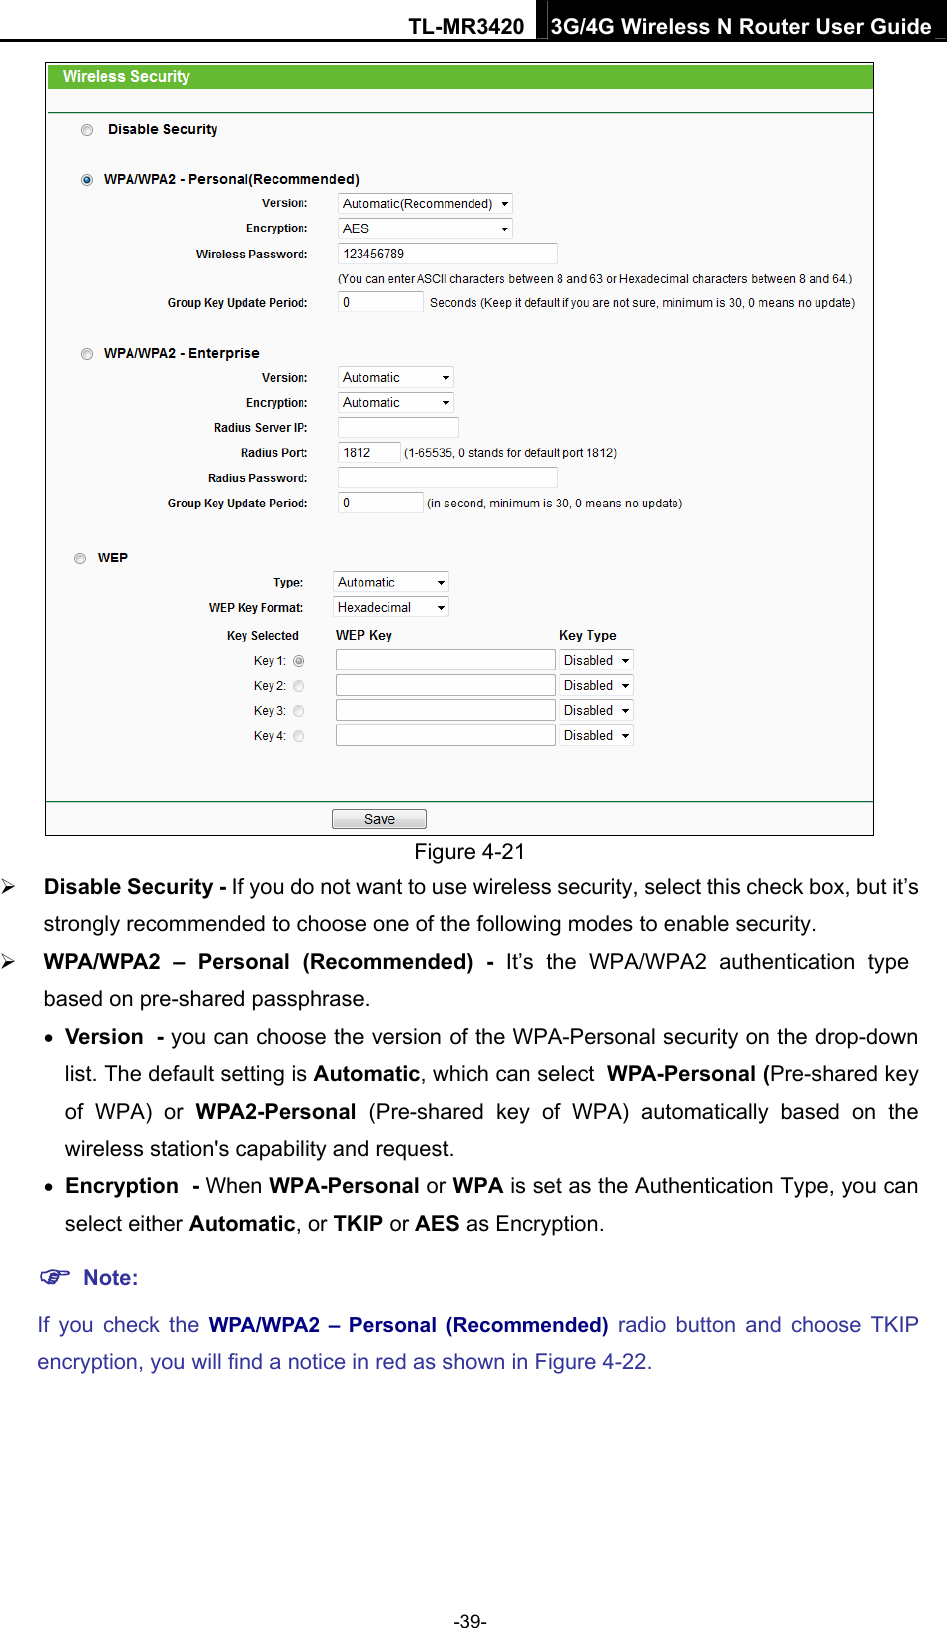 TL-MR3420 3G/4G Wireless N Router User Guide  Figure 4-21    Disable Security - If you do not want to use wireless security, select this check box, but it’s strongly recommended to choose one of the following modes to enable security.  WPA/WPA2 – Personal (Recommended) - It’s the WPA/WPA2 authentication type based on pre-shared passphrase.    Version - you can choose the version of the WPA-Personal security on the drop-down list. The default setting is Automatic, which can select WPA-Personal (Pre-shared key of WPA) or WPA2-Personal  (Pre-shared key of WPA) automatically based on the wireless station&apos;s capability and request.  Encryption - When WPA-Personal or WPA is set as the Authentication Type, you can select either Automatic, or TKIP or AES as Encryption.  Note:  If you check the WPA/WPA2 – Personal (Recommended) radio button and choose TKIP encryption, you will find a notice in red as shown in Figure 4-22. -39- 